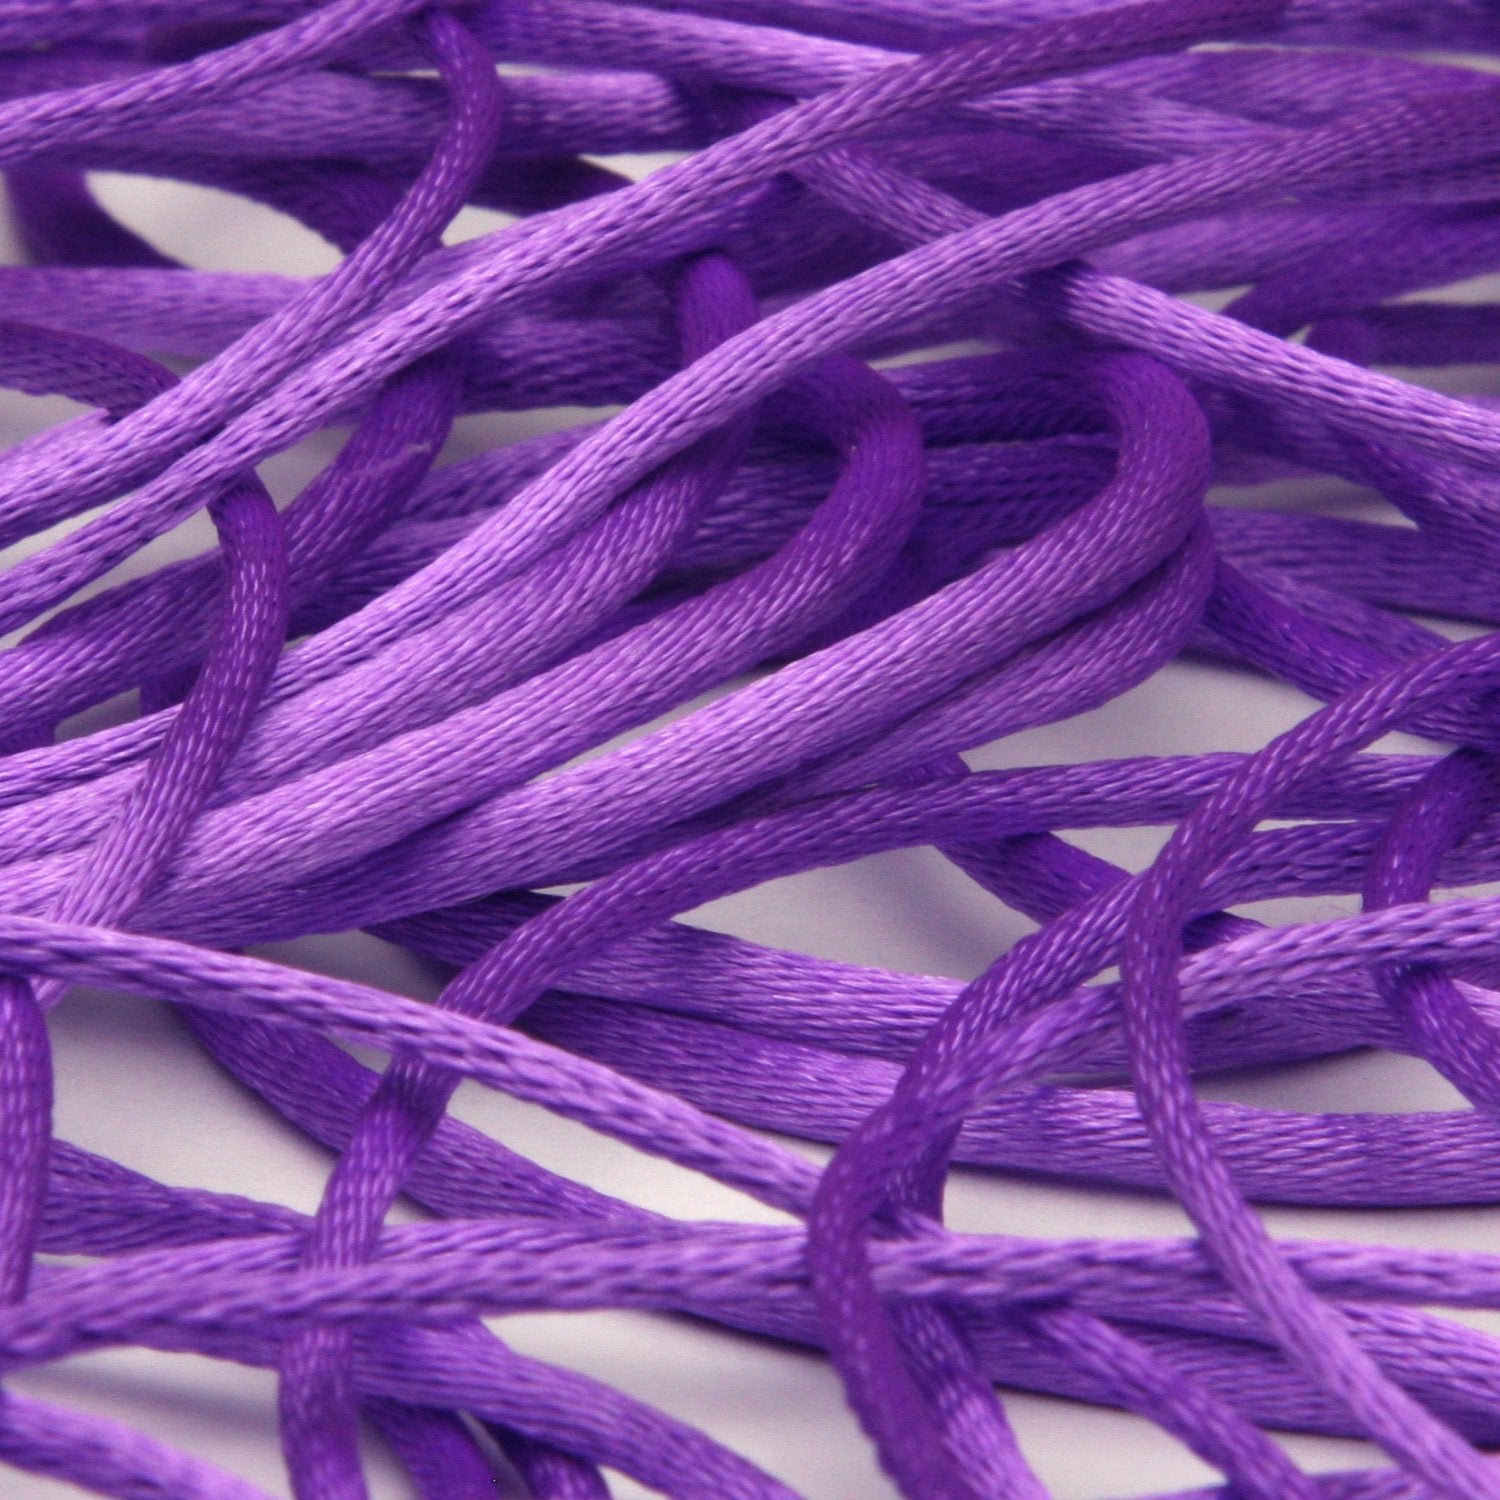 Sample] Polyester Satin Cord approx.1.5mm (1/16) 3 Meters Cut